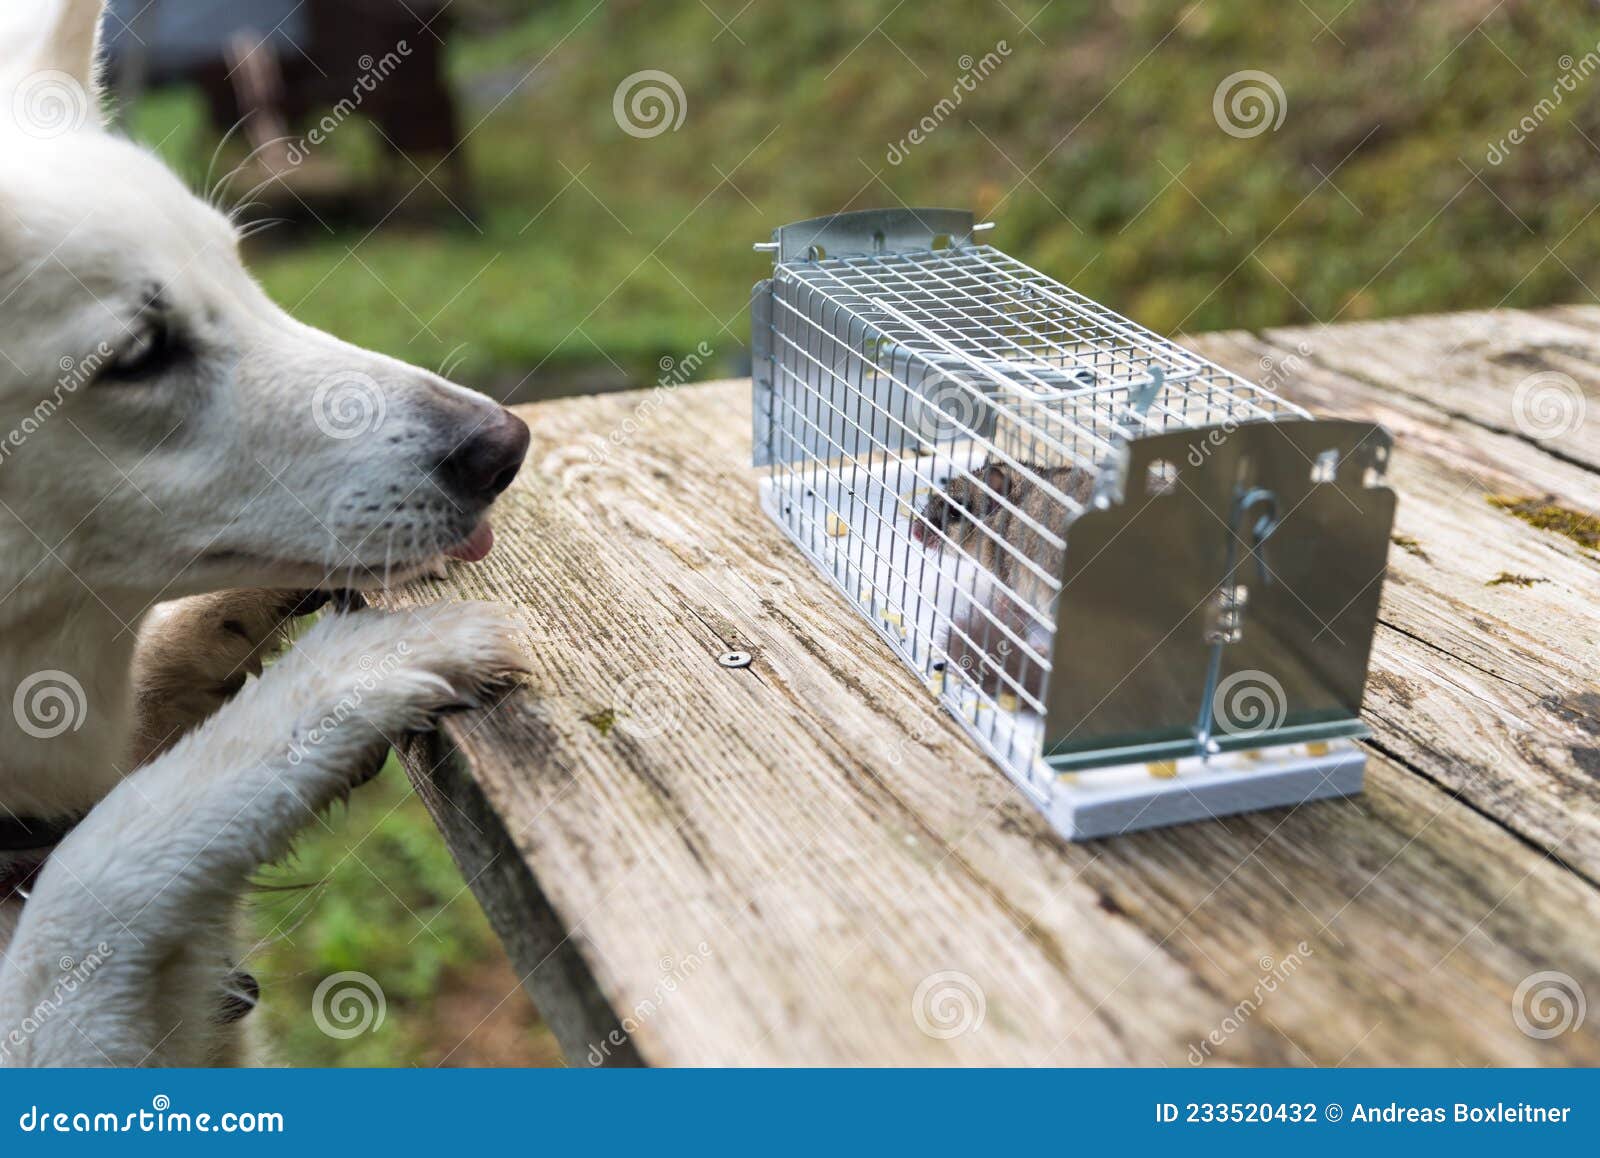 https://thumbs.dreamstime.com/z/trapped-dormouse-live-trap-trapped-dormouse-live-trap-watched-dog-233520432.jpg